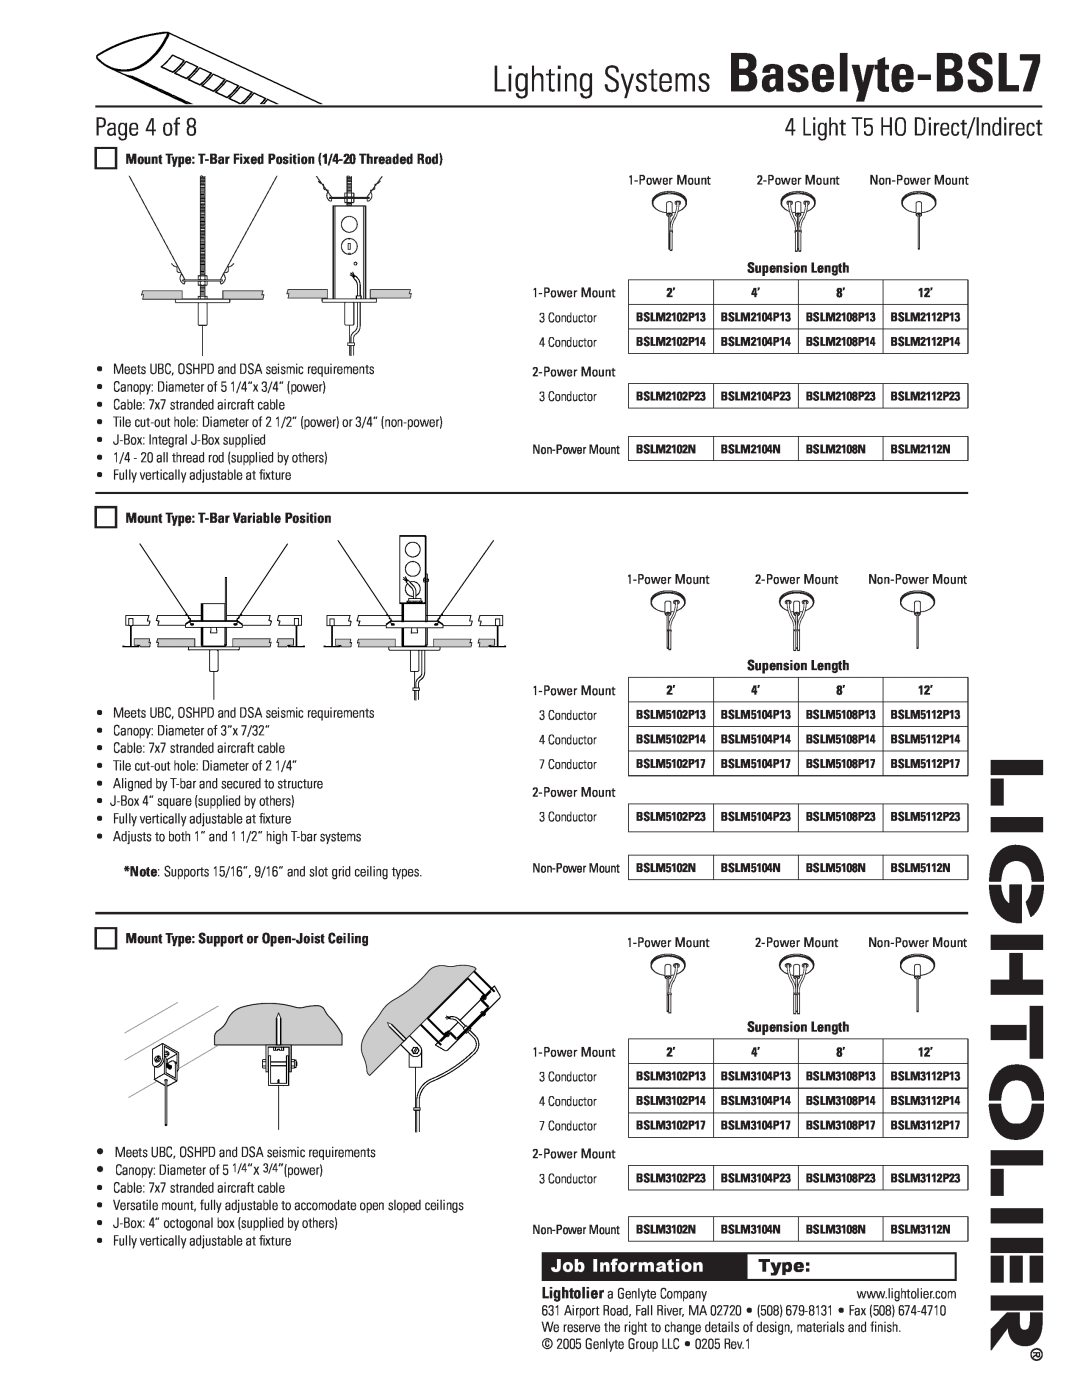 Lightolier Baselyte-BSL7 specifications Mount Type T-BarVariable Position, Mount Type Support or Open-JoistCeiling, Page of 